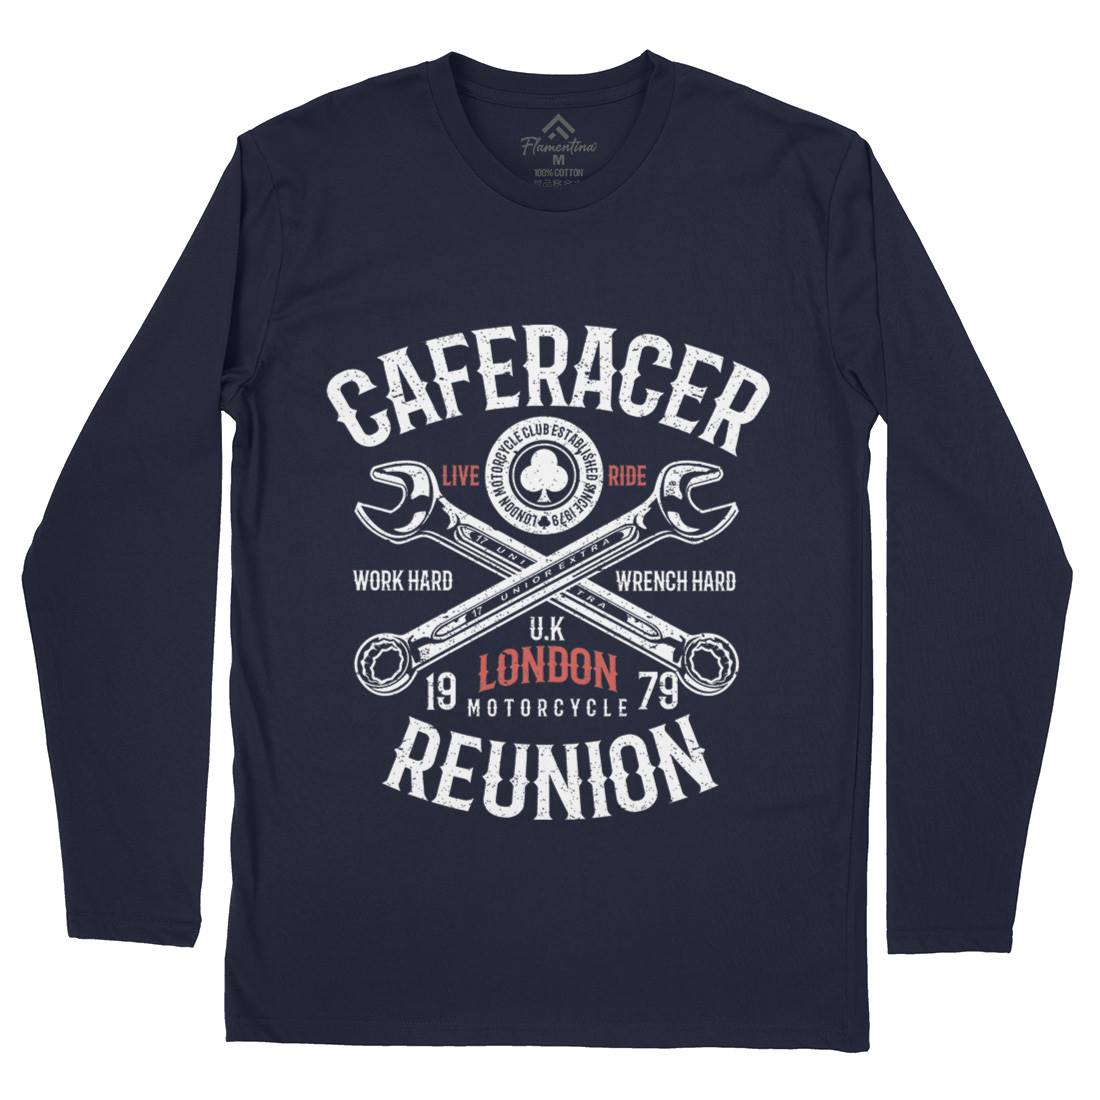 Caferacer Reunion Mens Long Sleeve T-Shirt Motorcycles A025